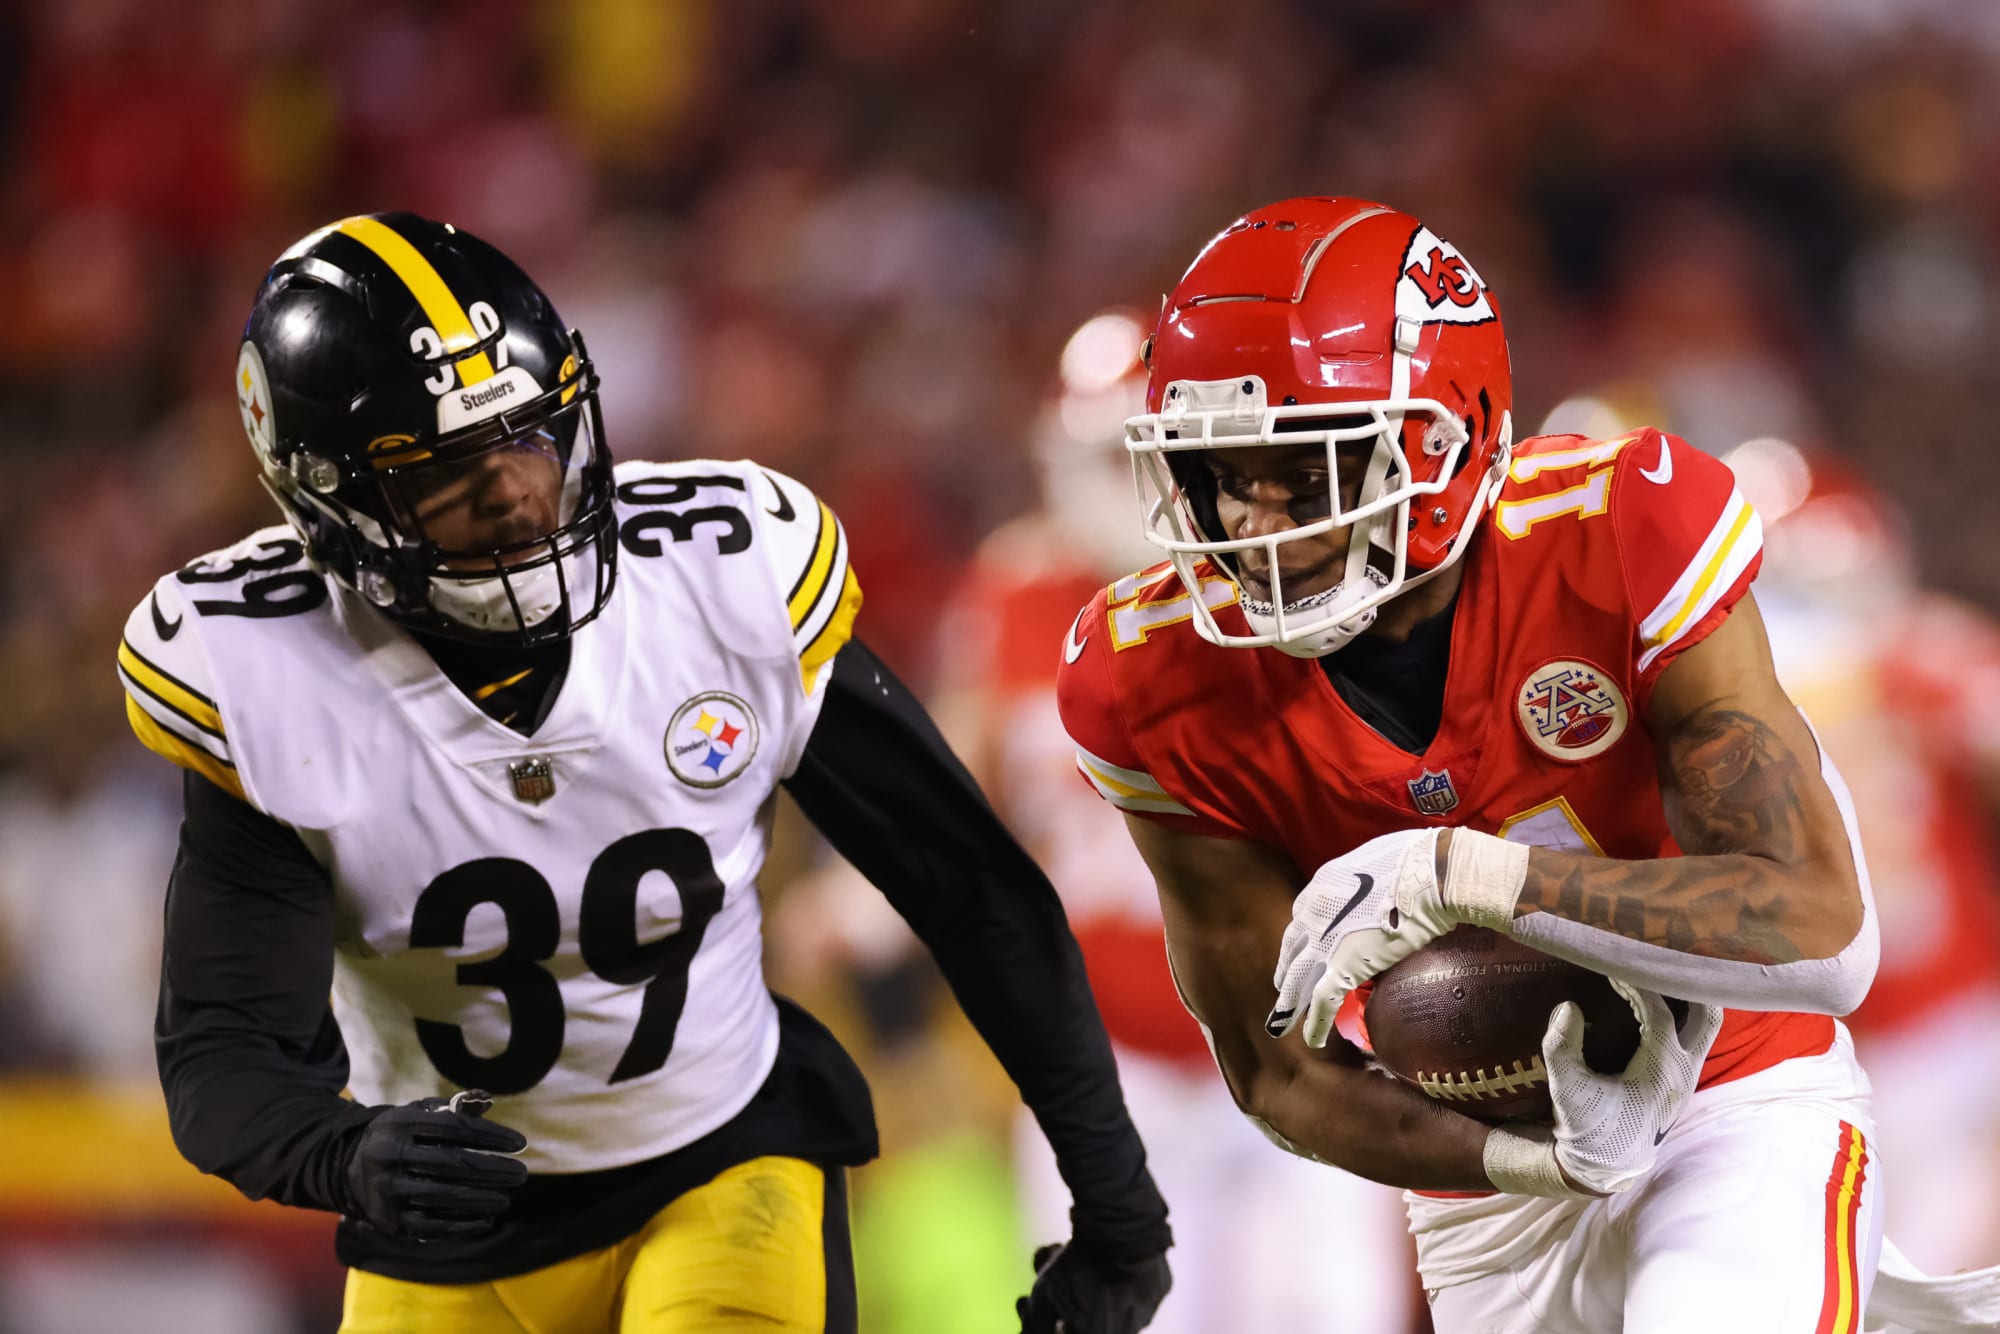 ‘Embarrassing’ Chiefs loss motivates Steelers